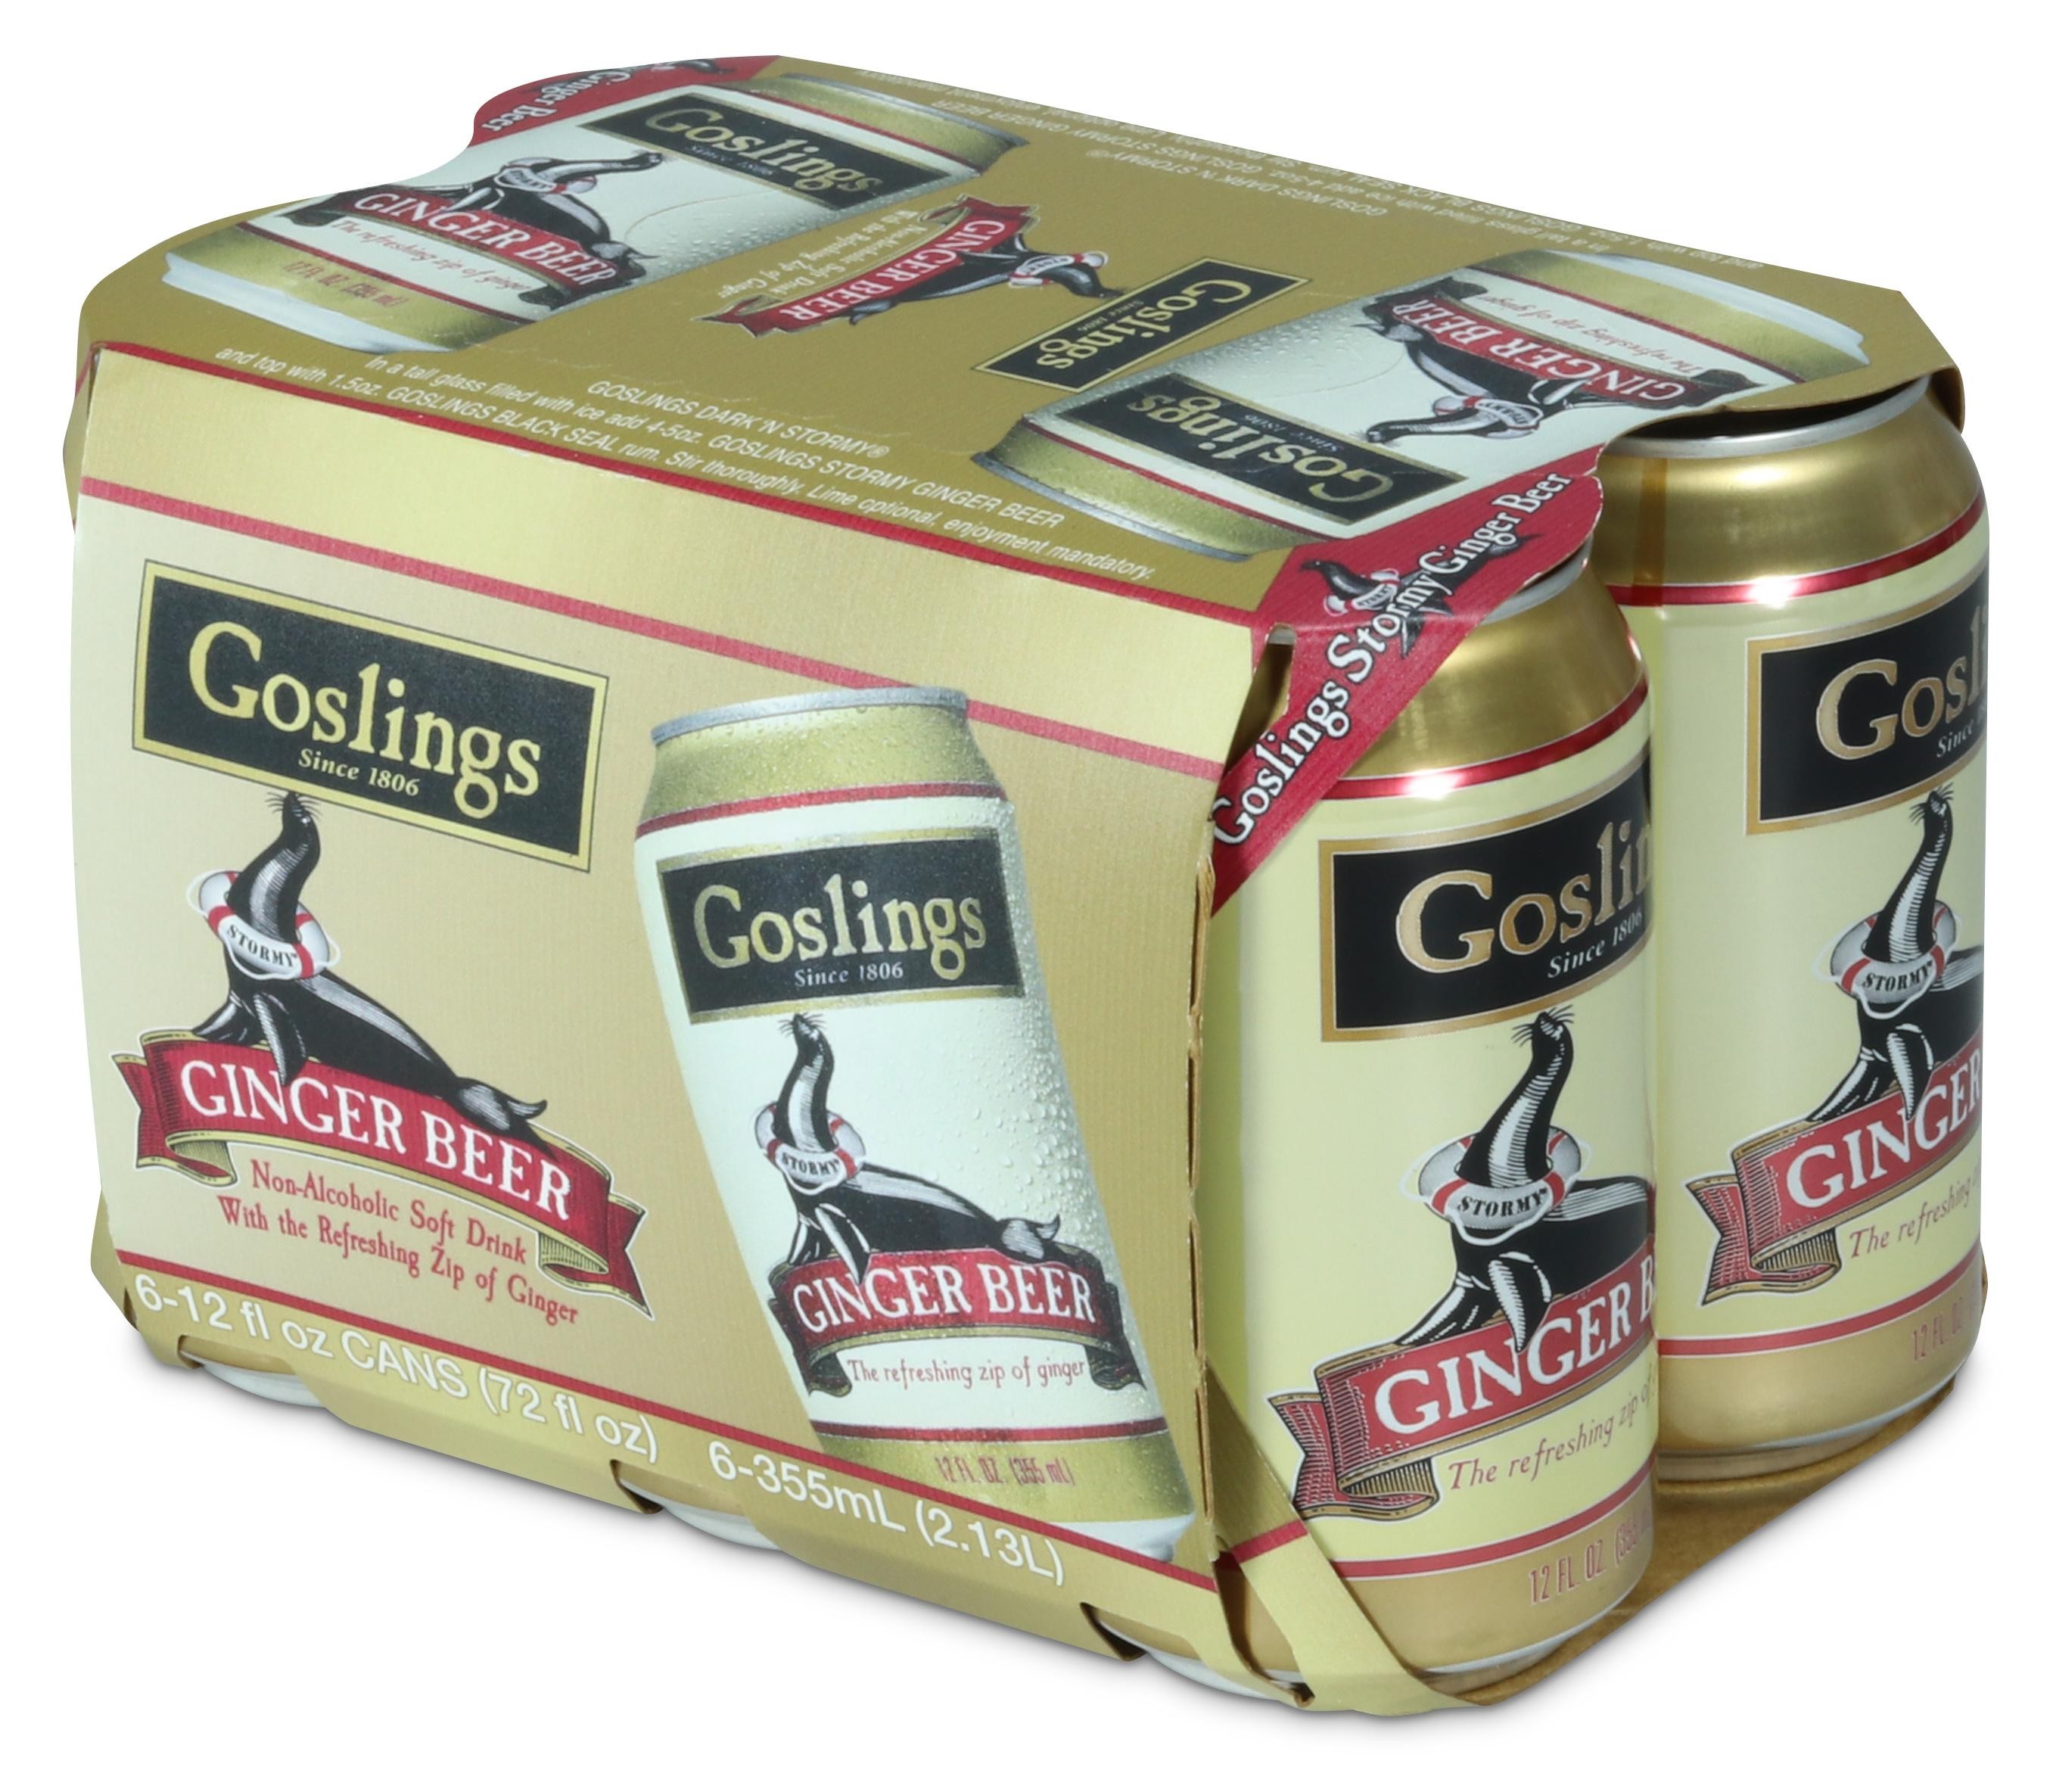 Gosling Stormy Ginger Beer 6pk can